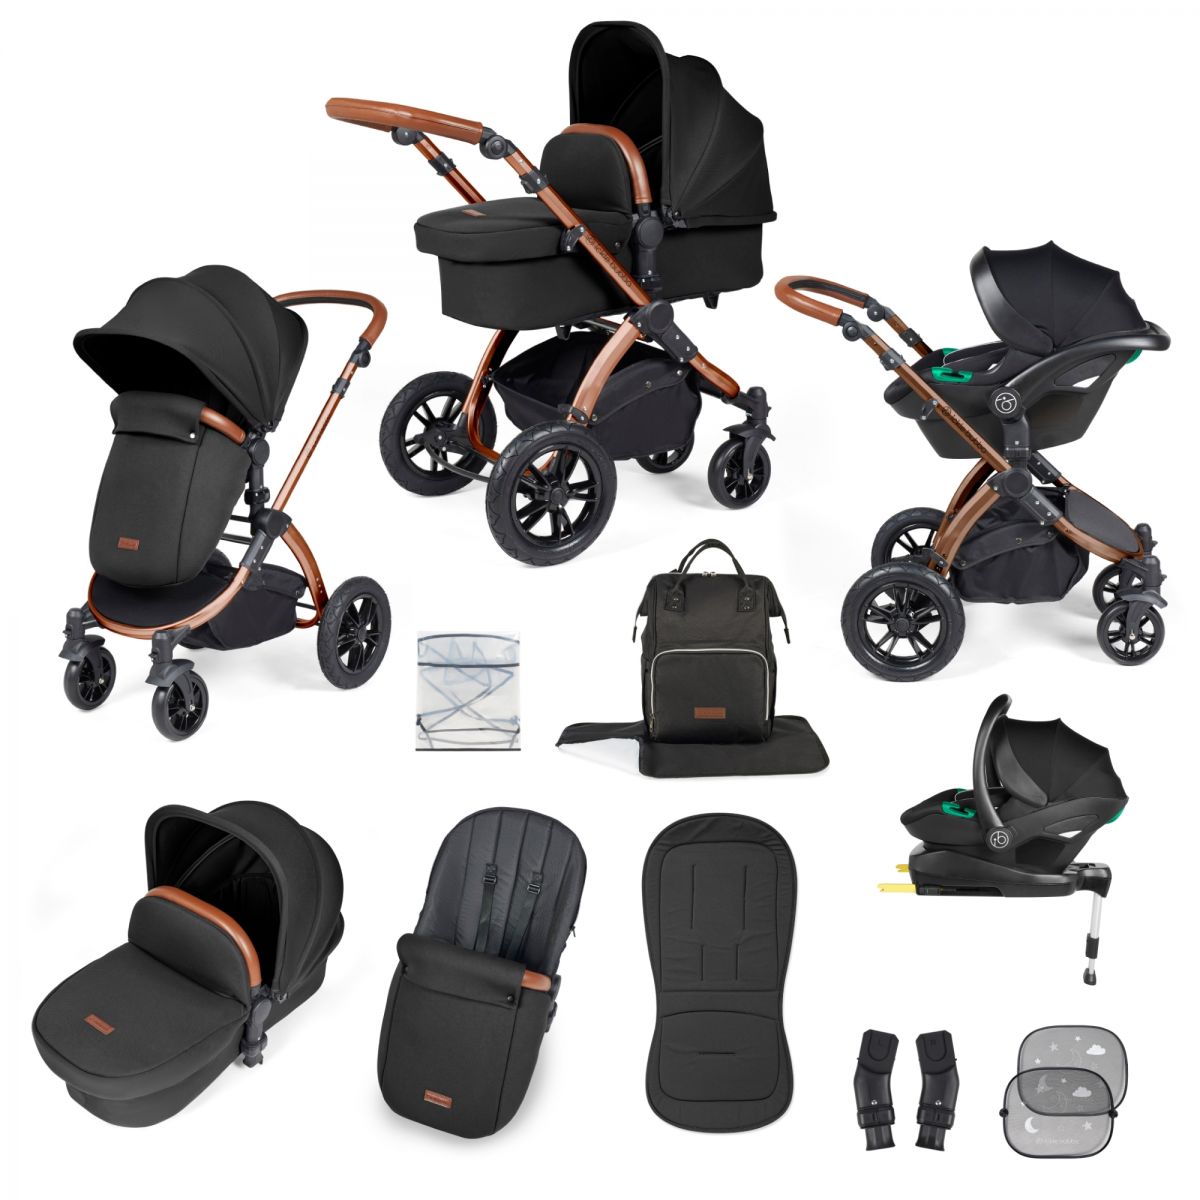 ickle bubba travel system reviews